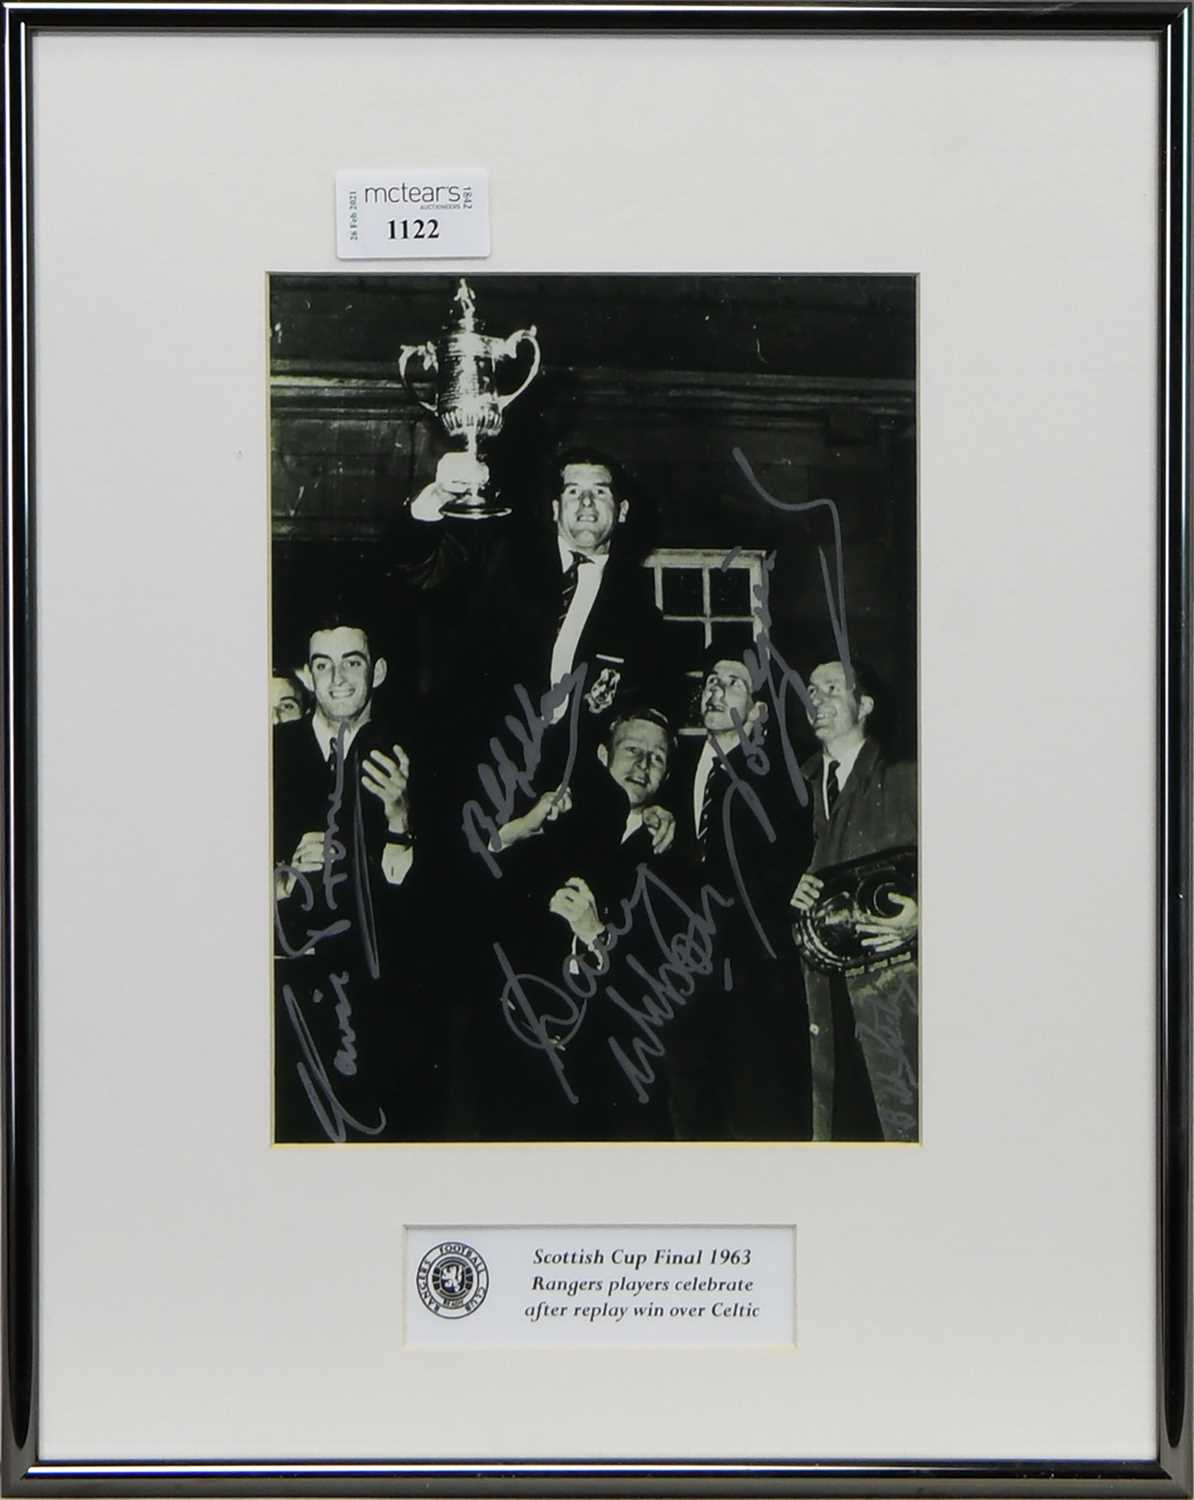 Lot 1122 - A FRAMED SIGNED PHOTOGRAPH FROM THE SCOTTISH CUP FINAL 1963